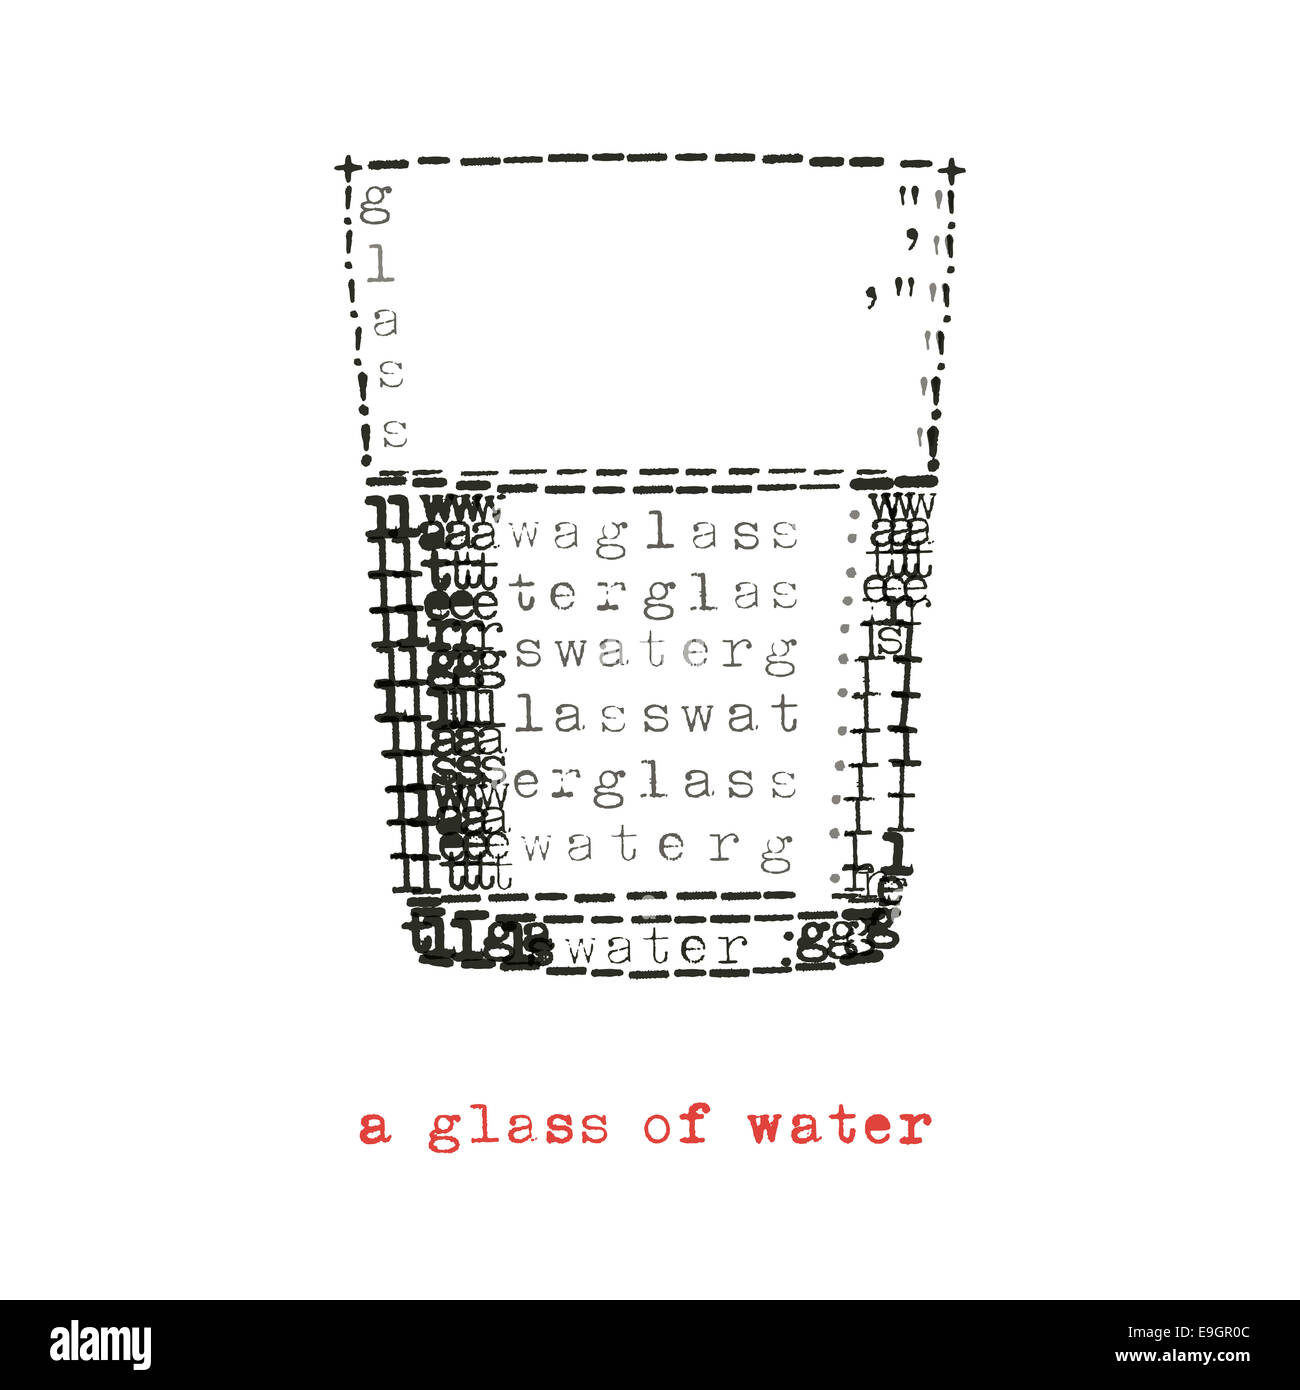 a glass of water in typewriter art Stock Photo